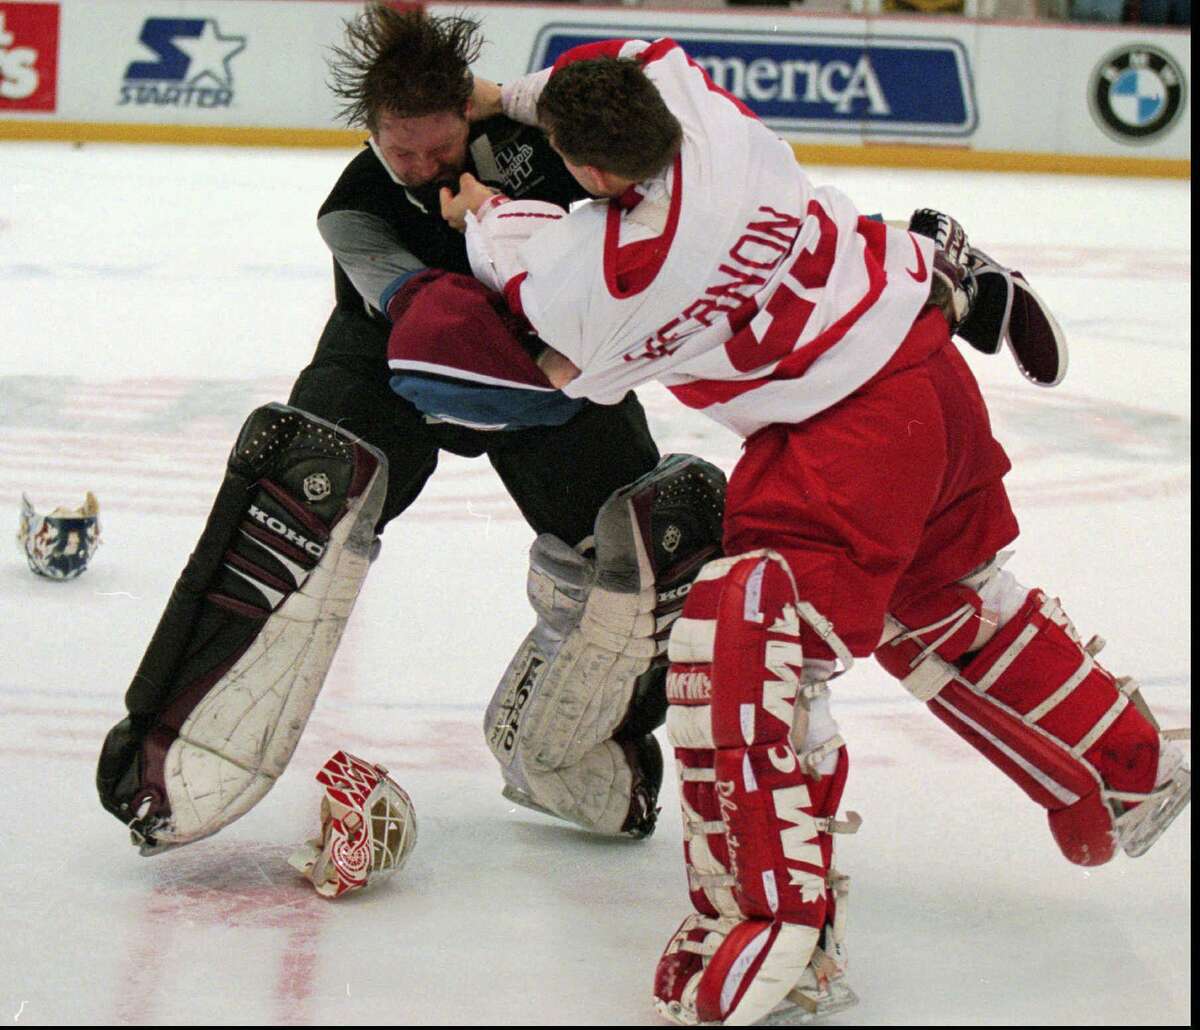 Not in Hall of Fame - 11. Mike Vernon